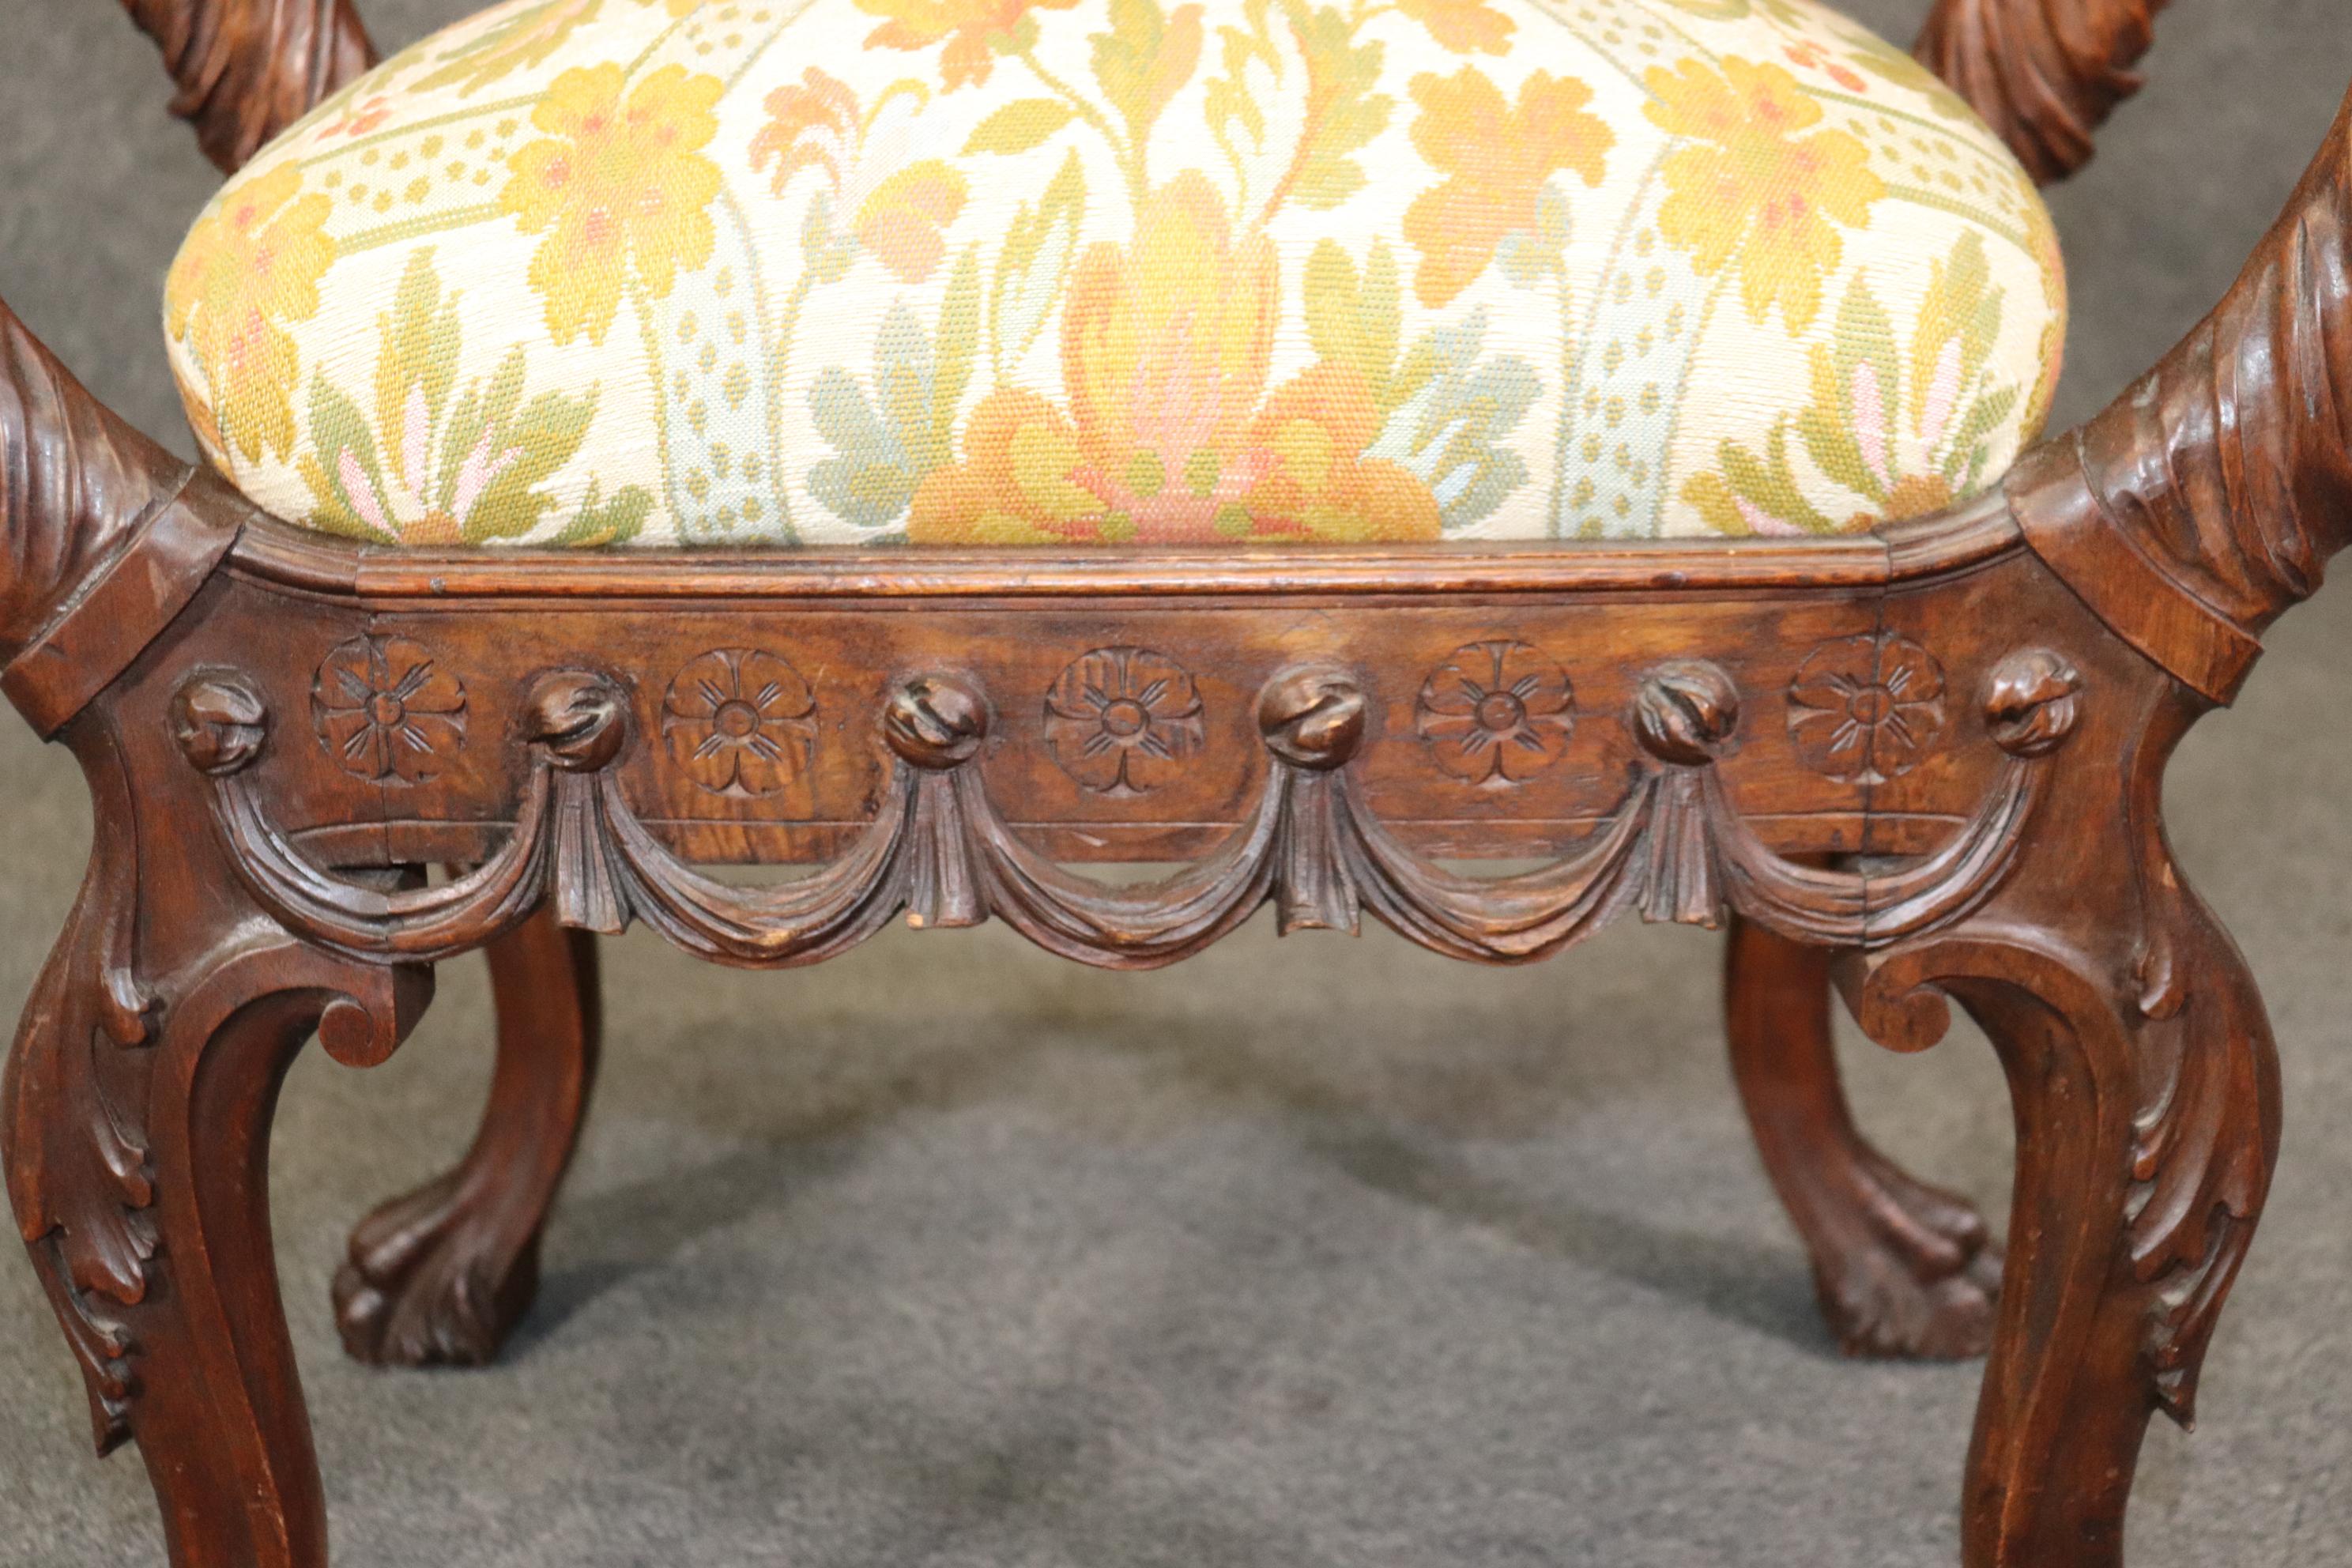 Rare Carved Figural Maiden Walnut Victorian Bench Stool Circa 1870 For Sale 3